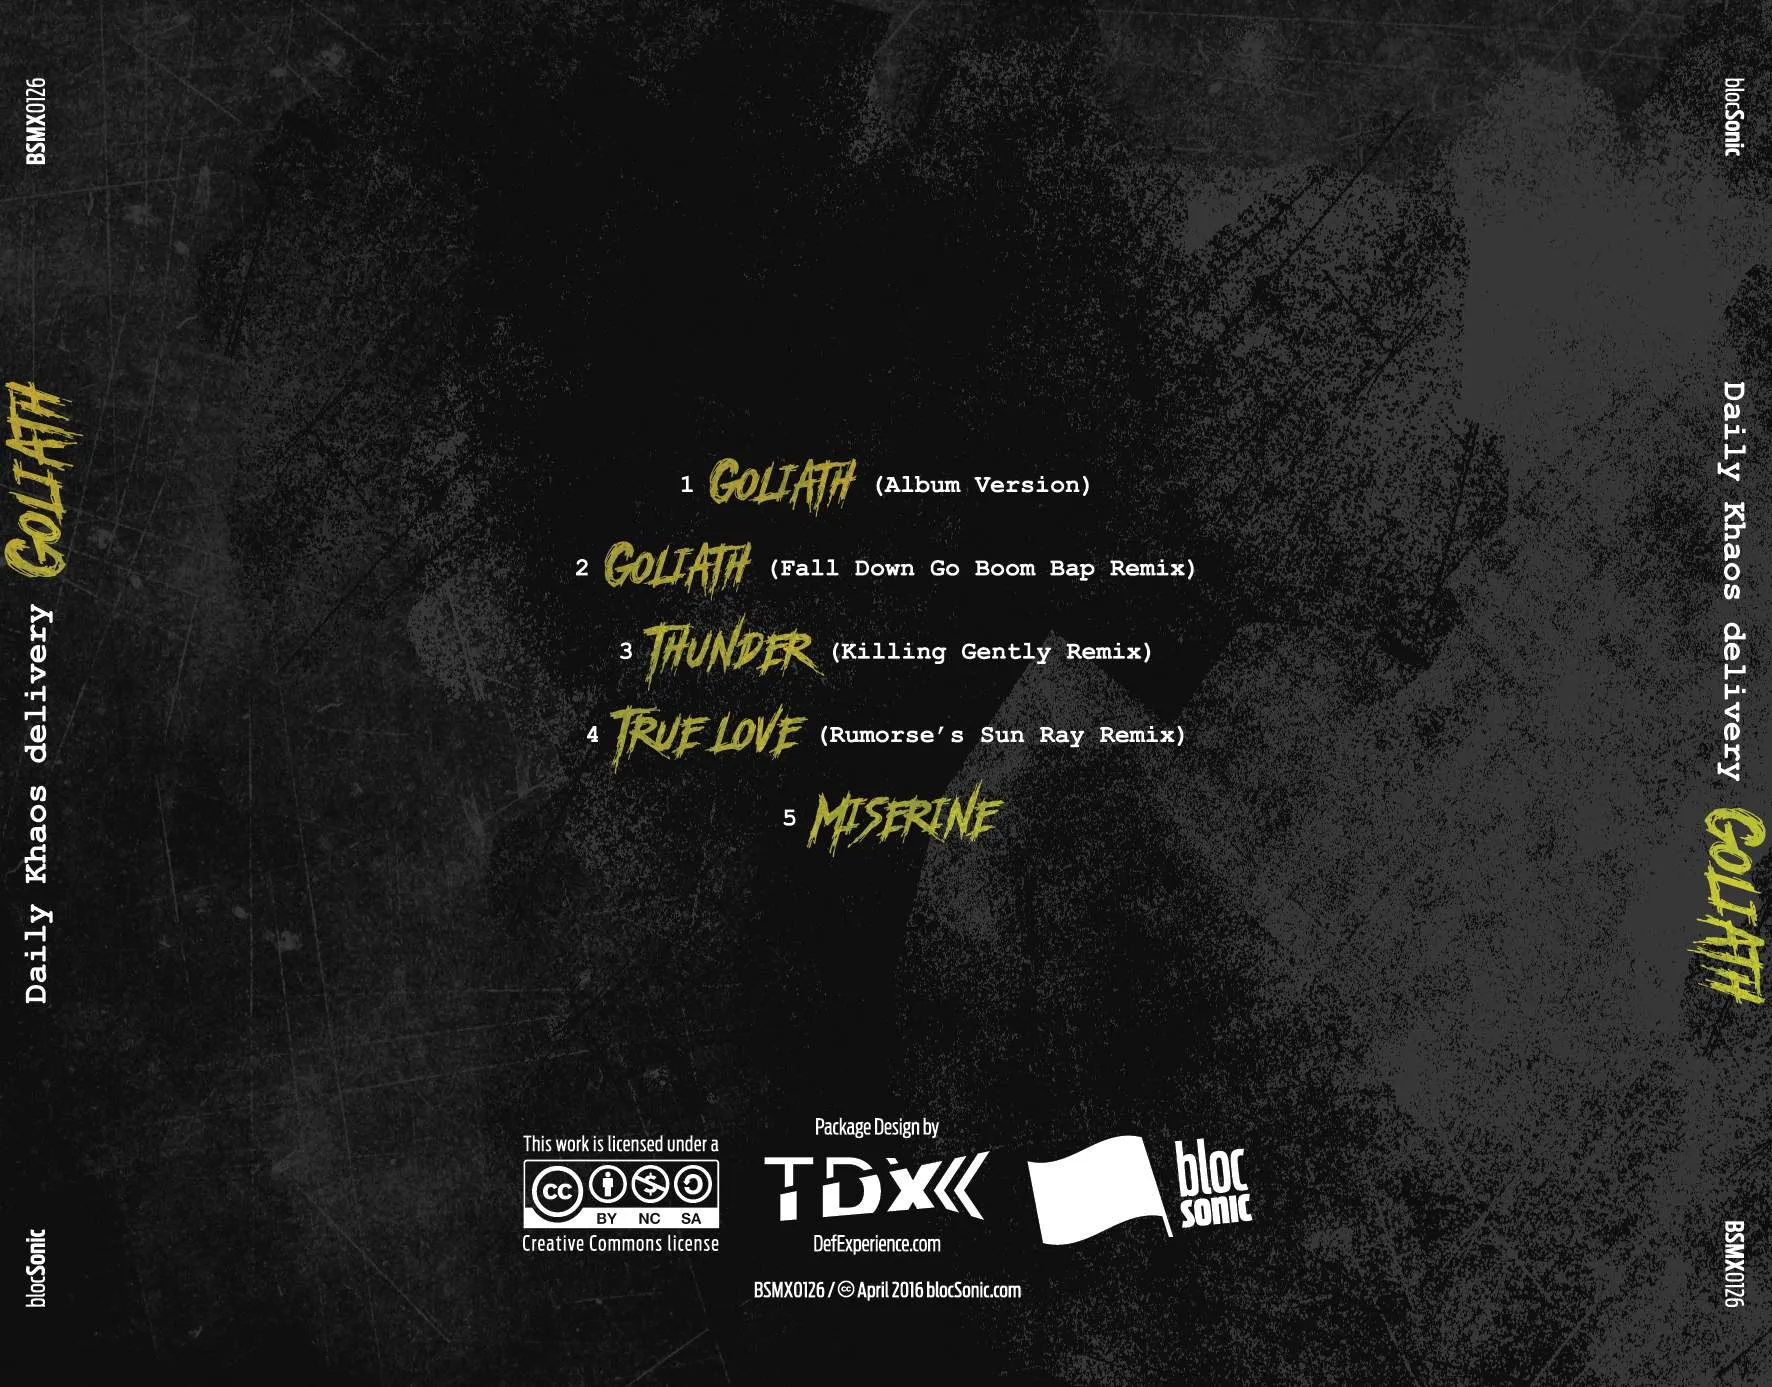 Album traycard for “Goliath” by Daily Khaos delivery